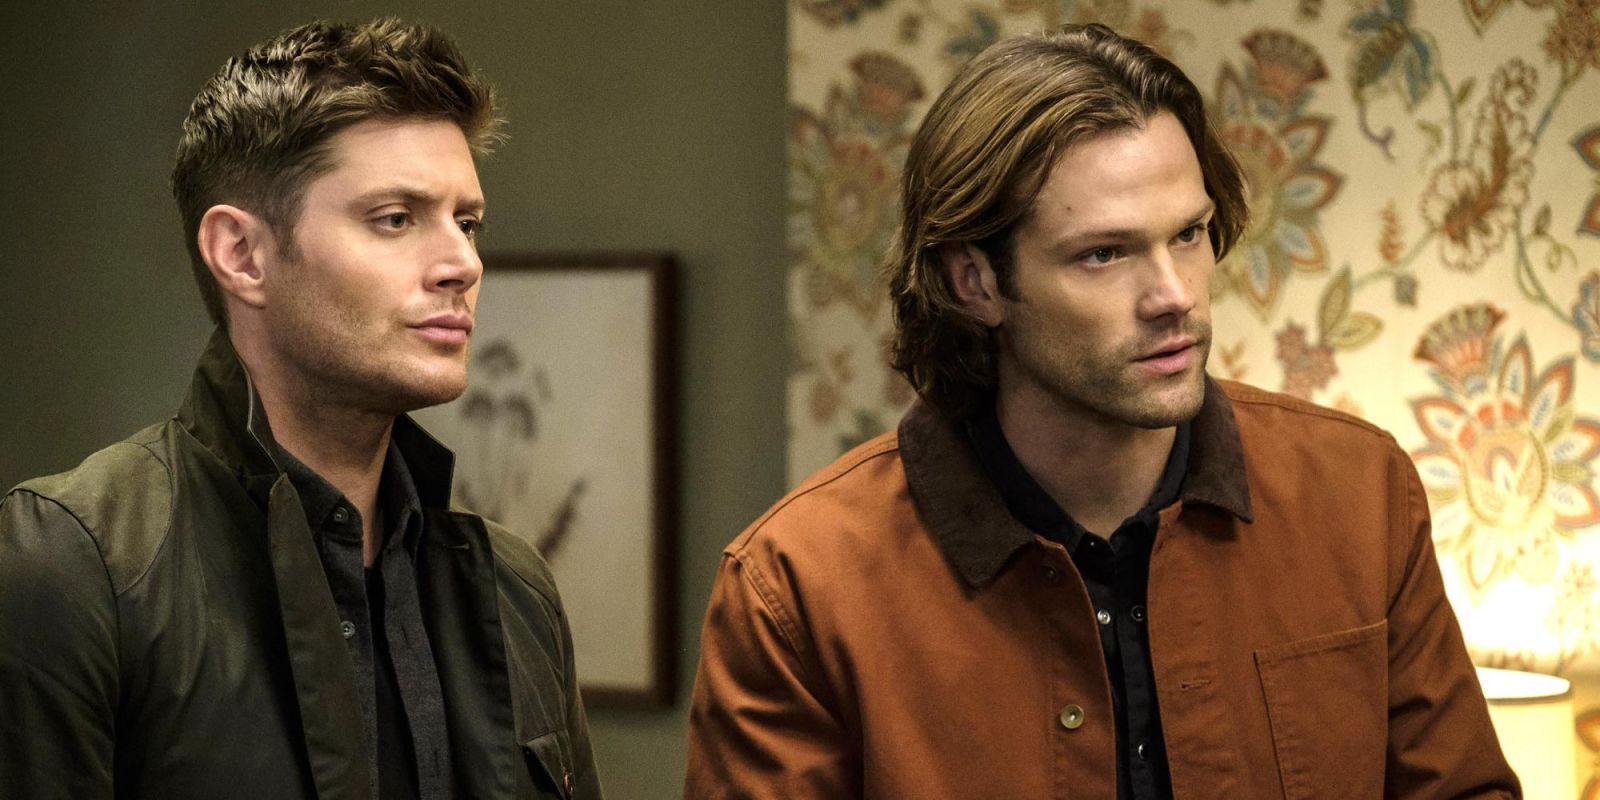 Supernatural: Who’s The Better Brother? (Dean Vs Sam)